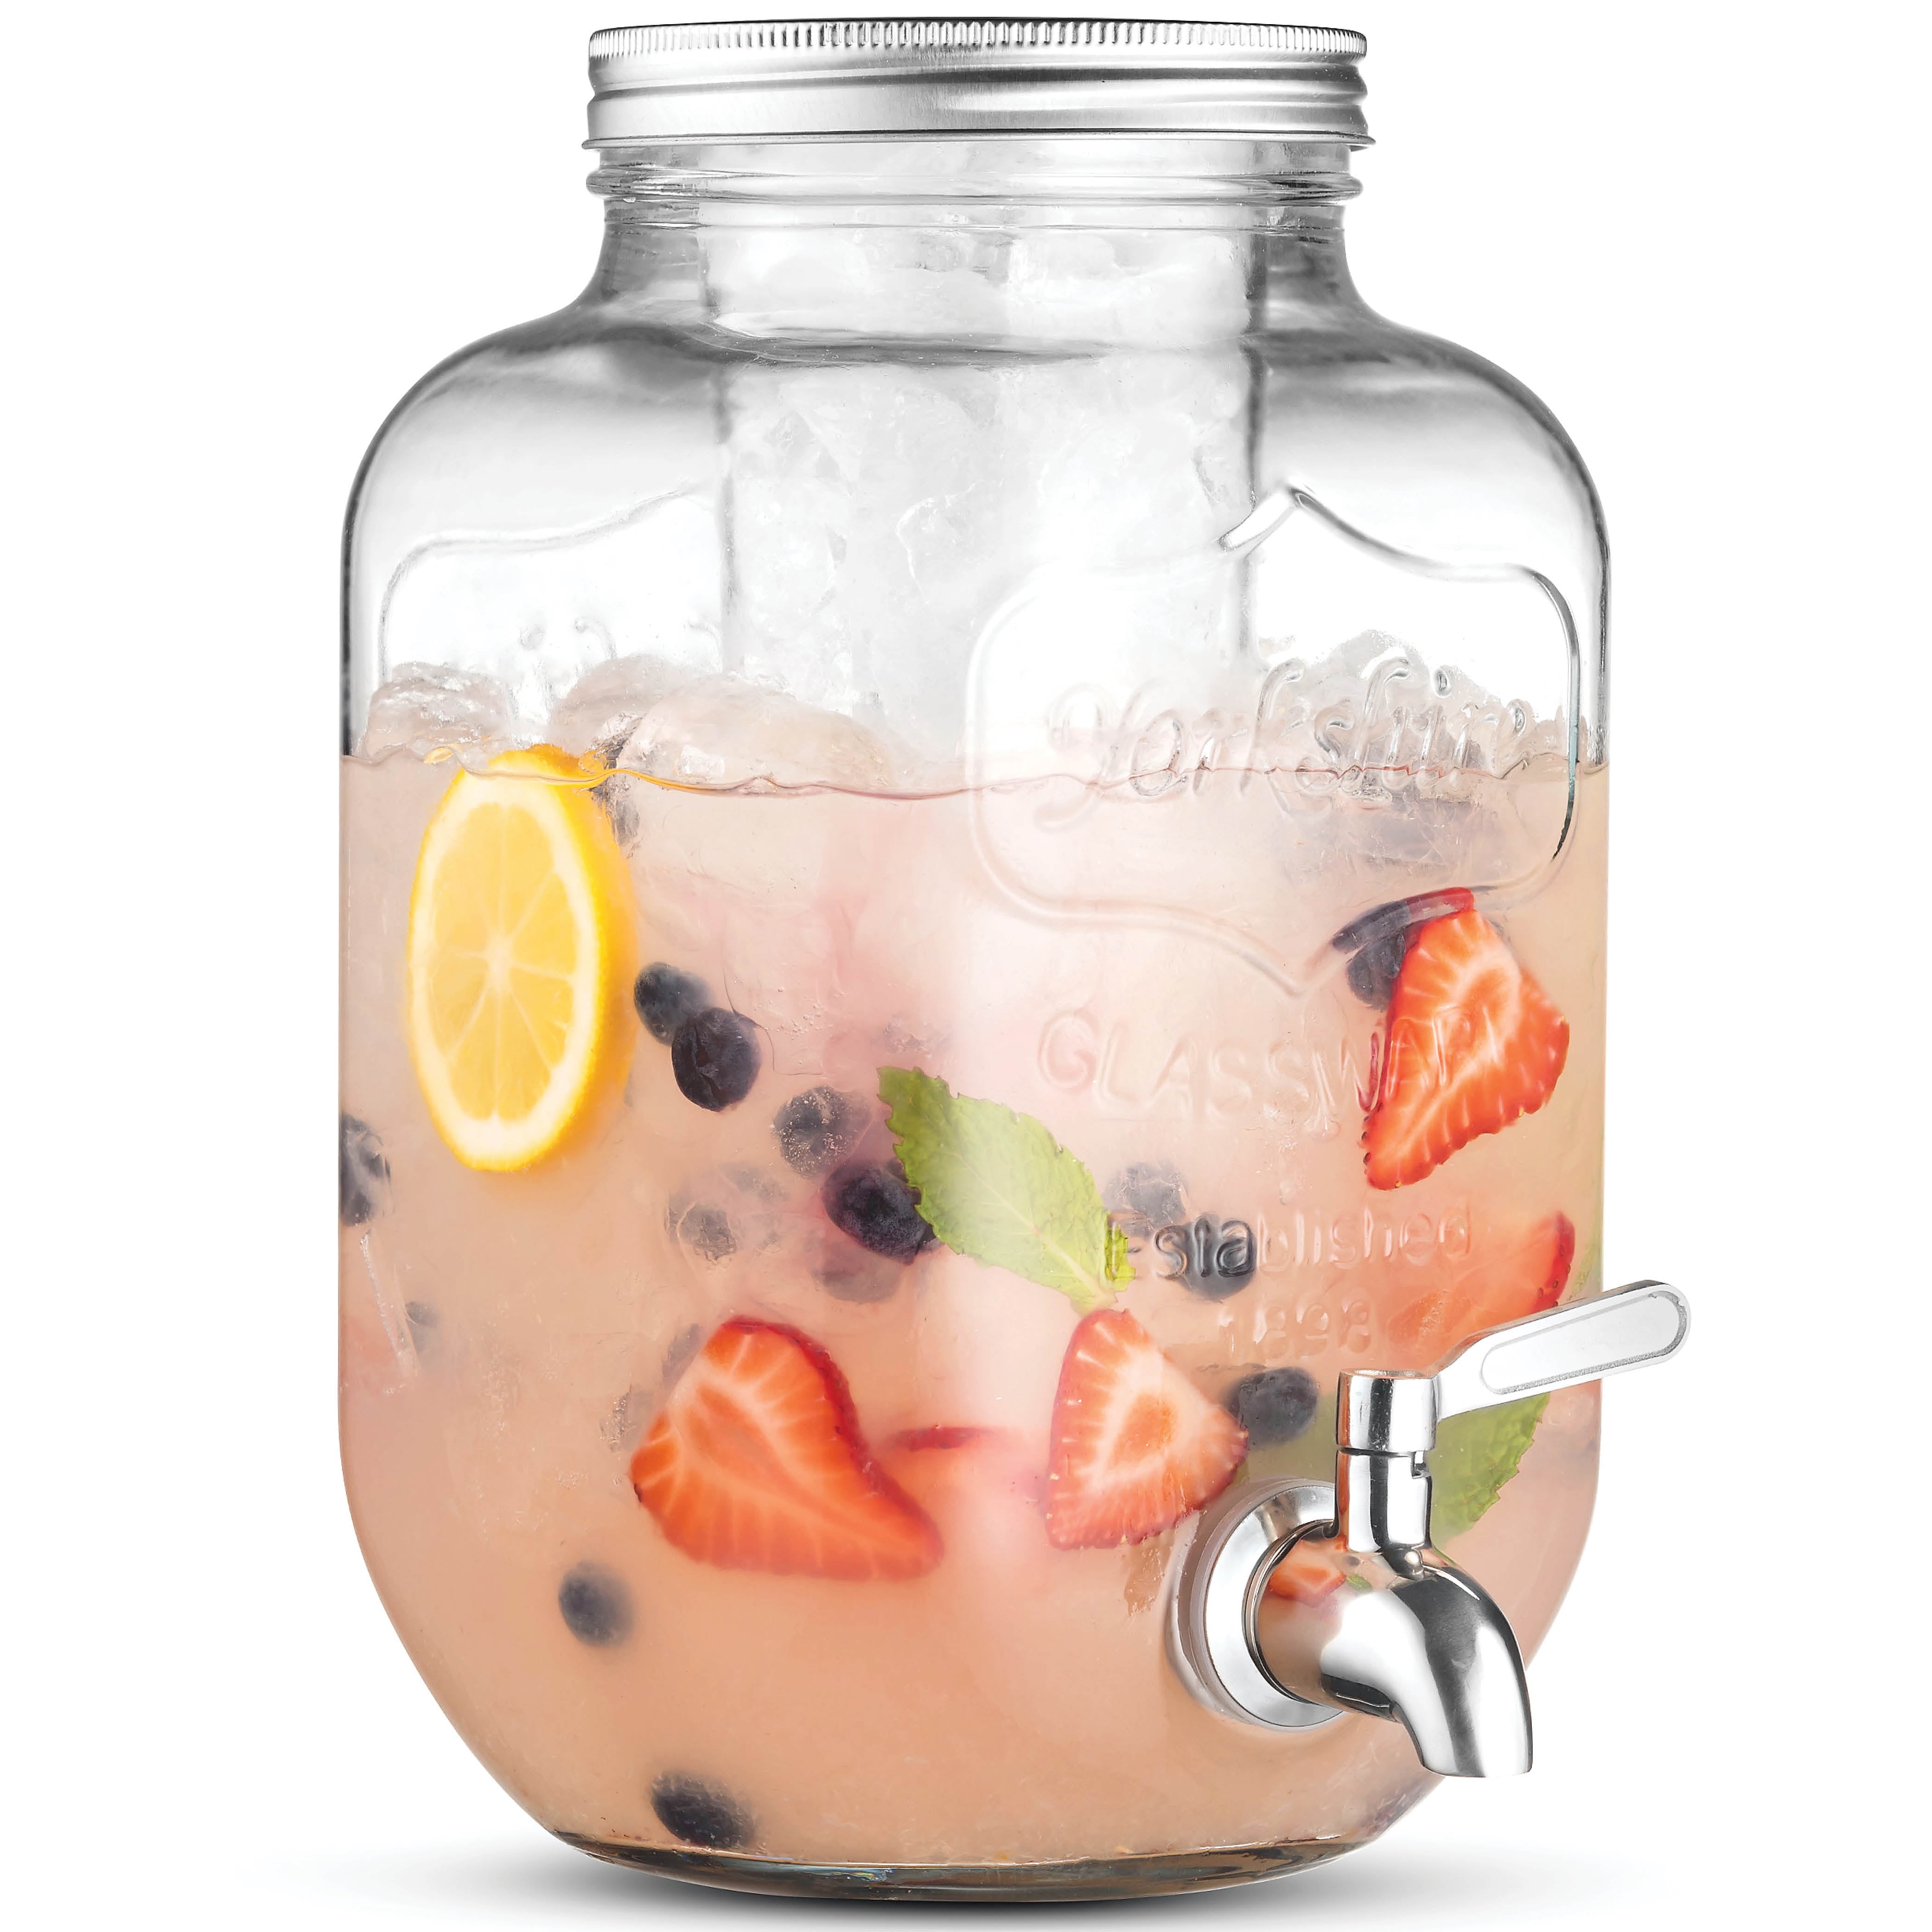 2 Gallon Glass Beverage with Stainless Steel - 100%Leak Proof - Wide Mouth Easy - Drink Dispenser Beverage For Outdoor, Parties and Daily Use - Walmart.com